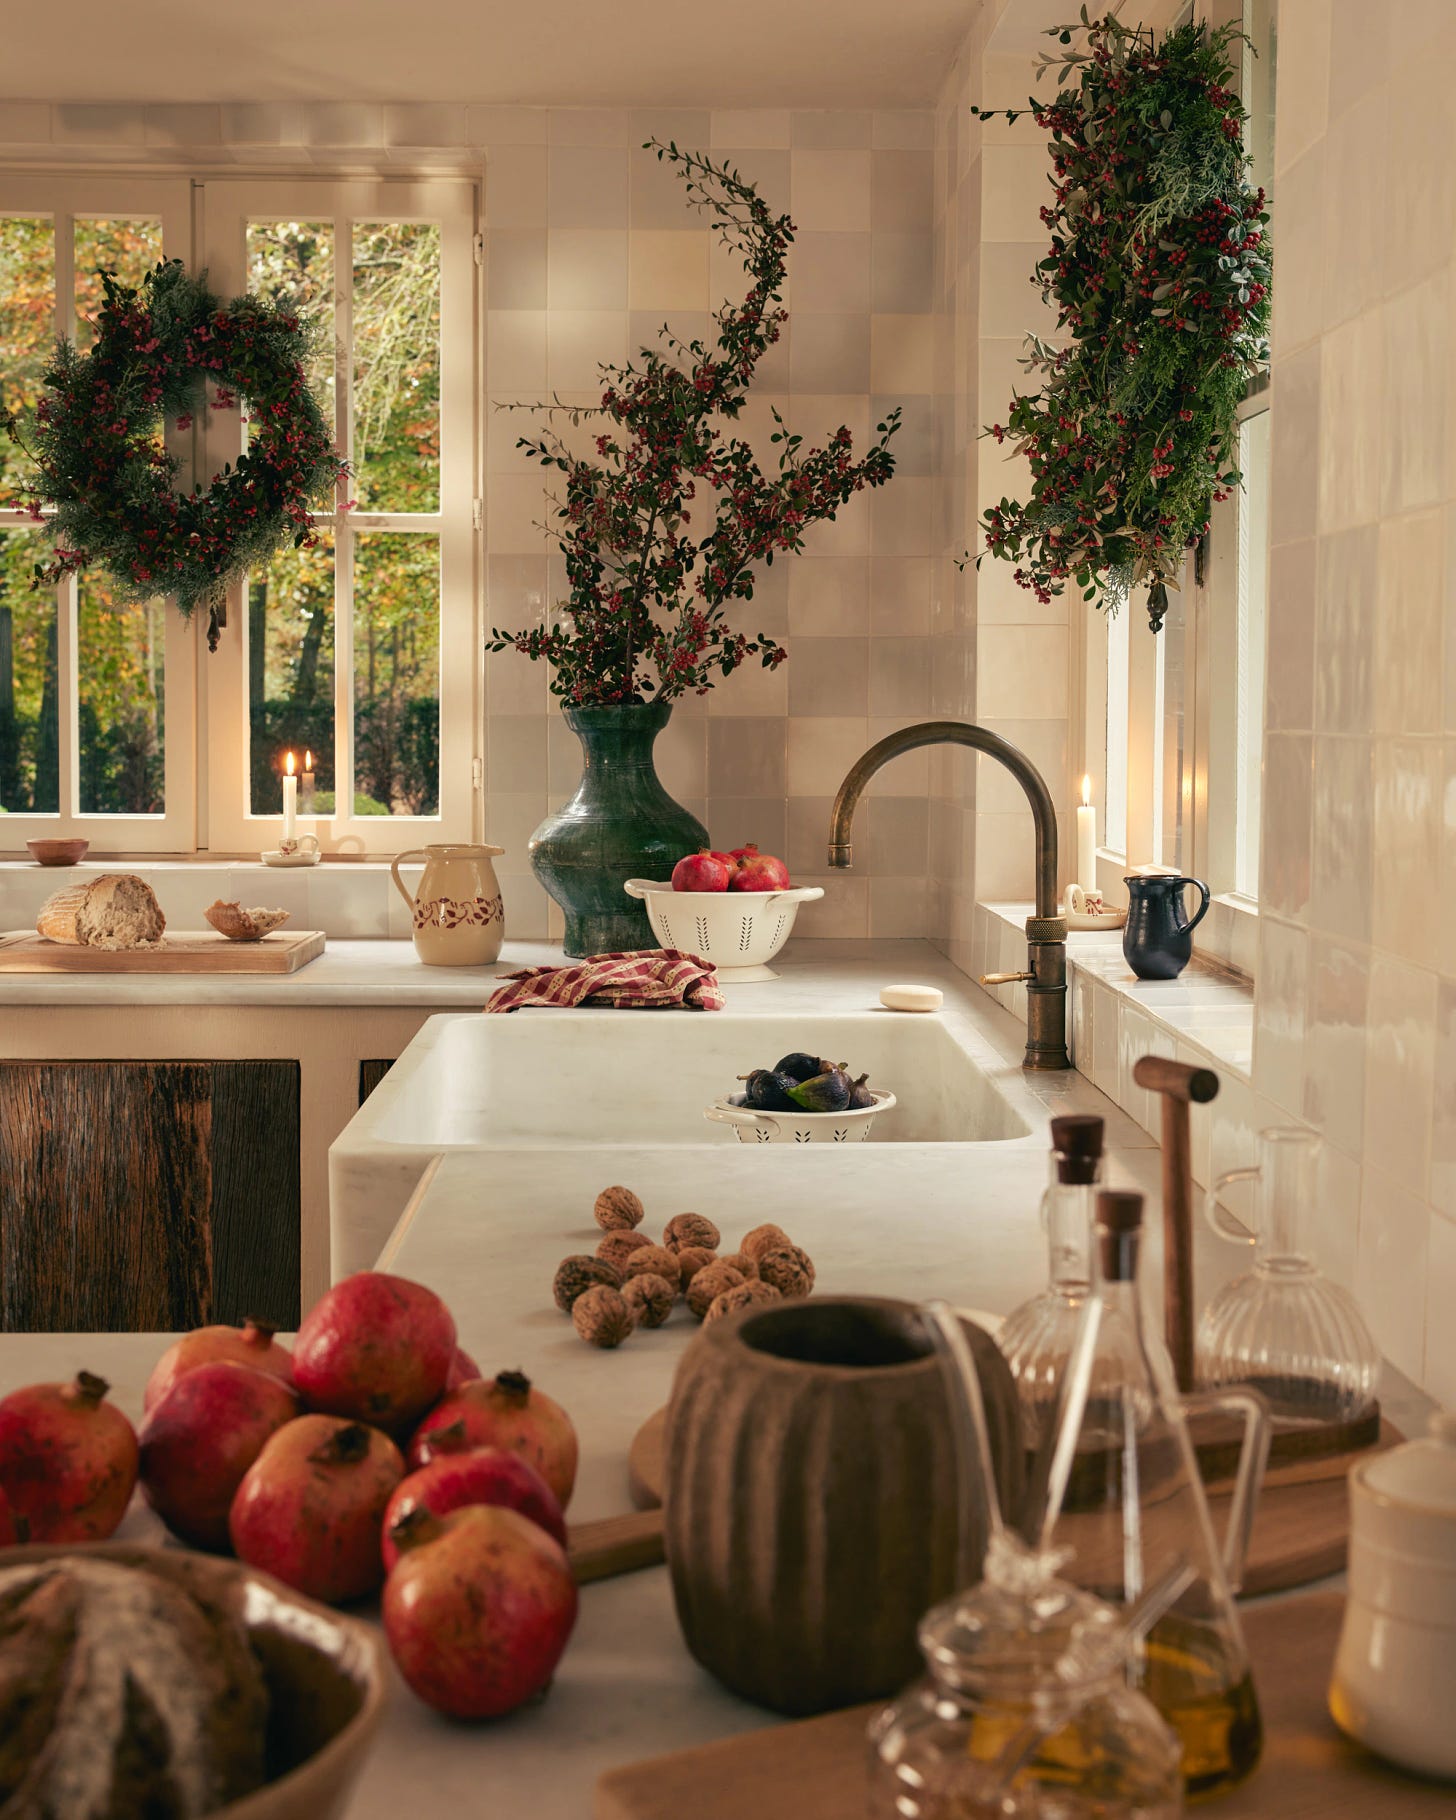 A festive kitchen with wreath, florals, candles, and produce strewn throughout.